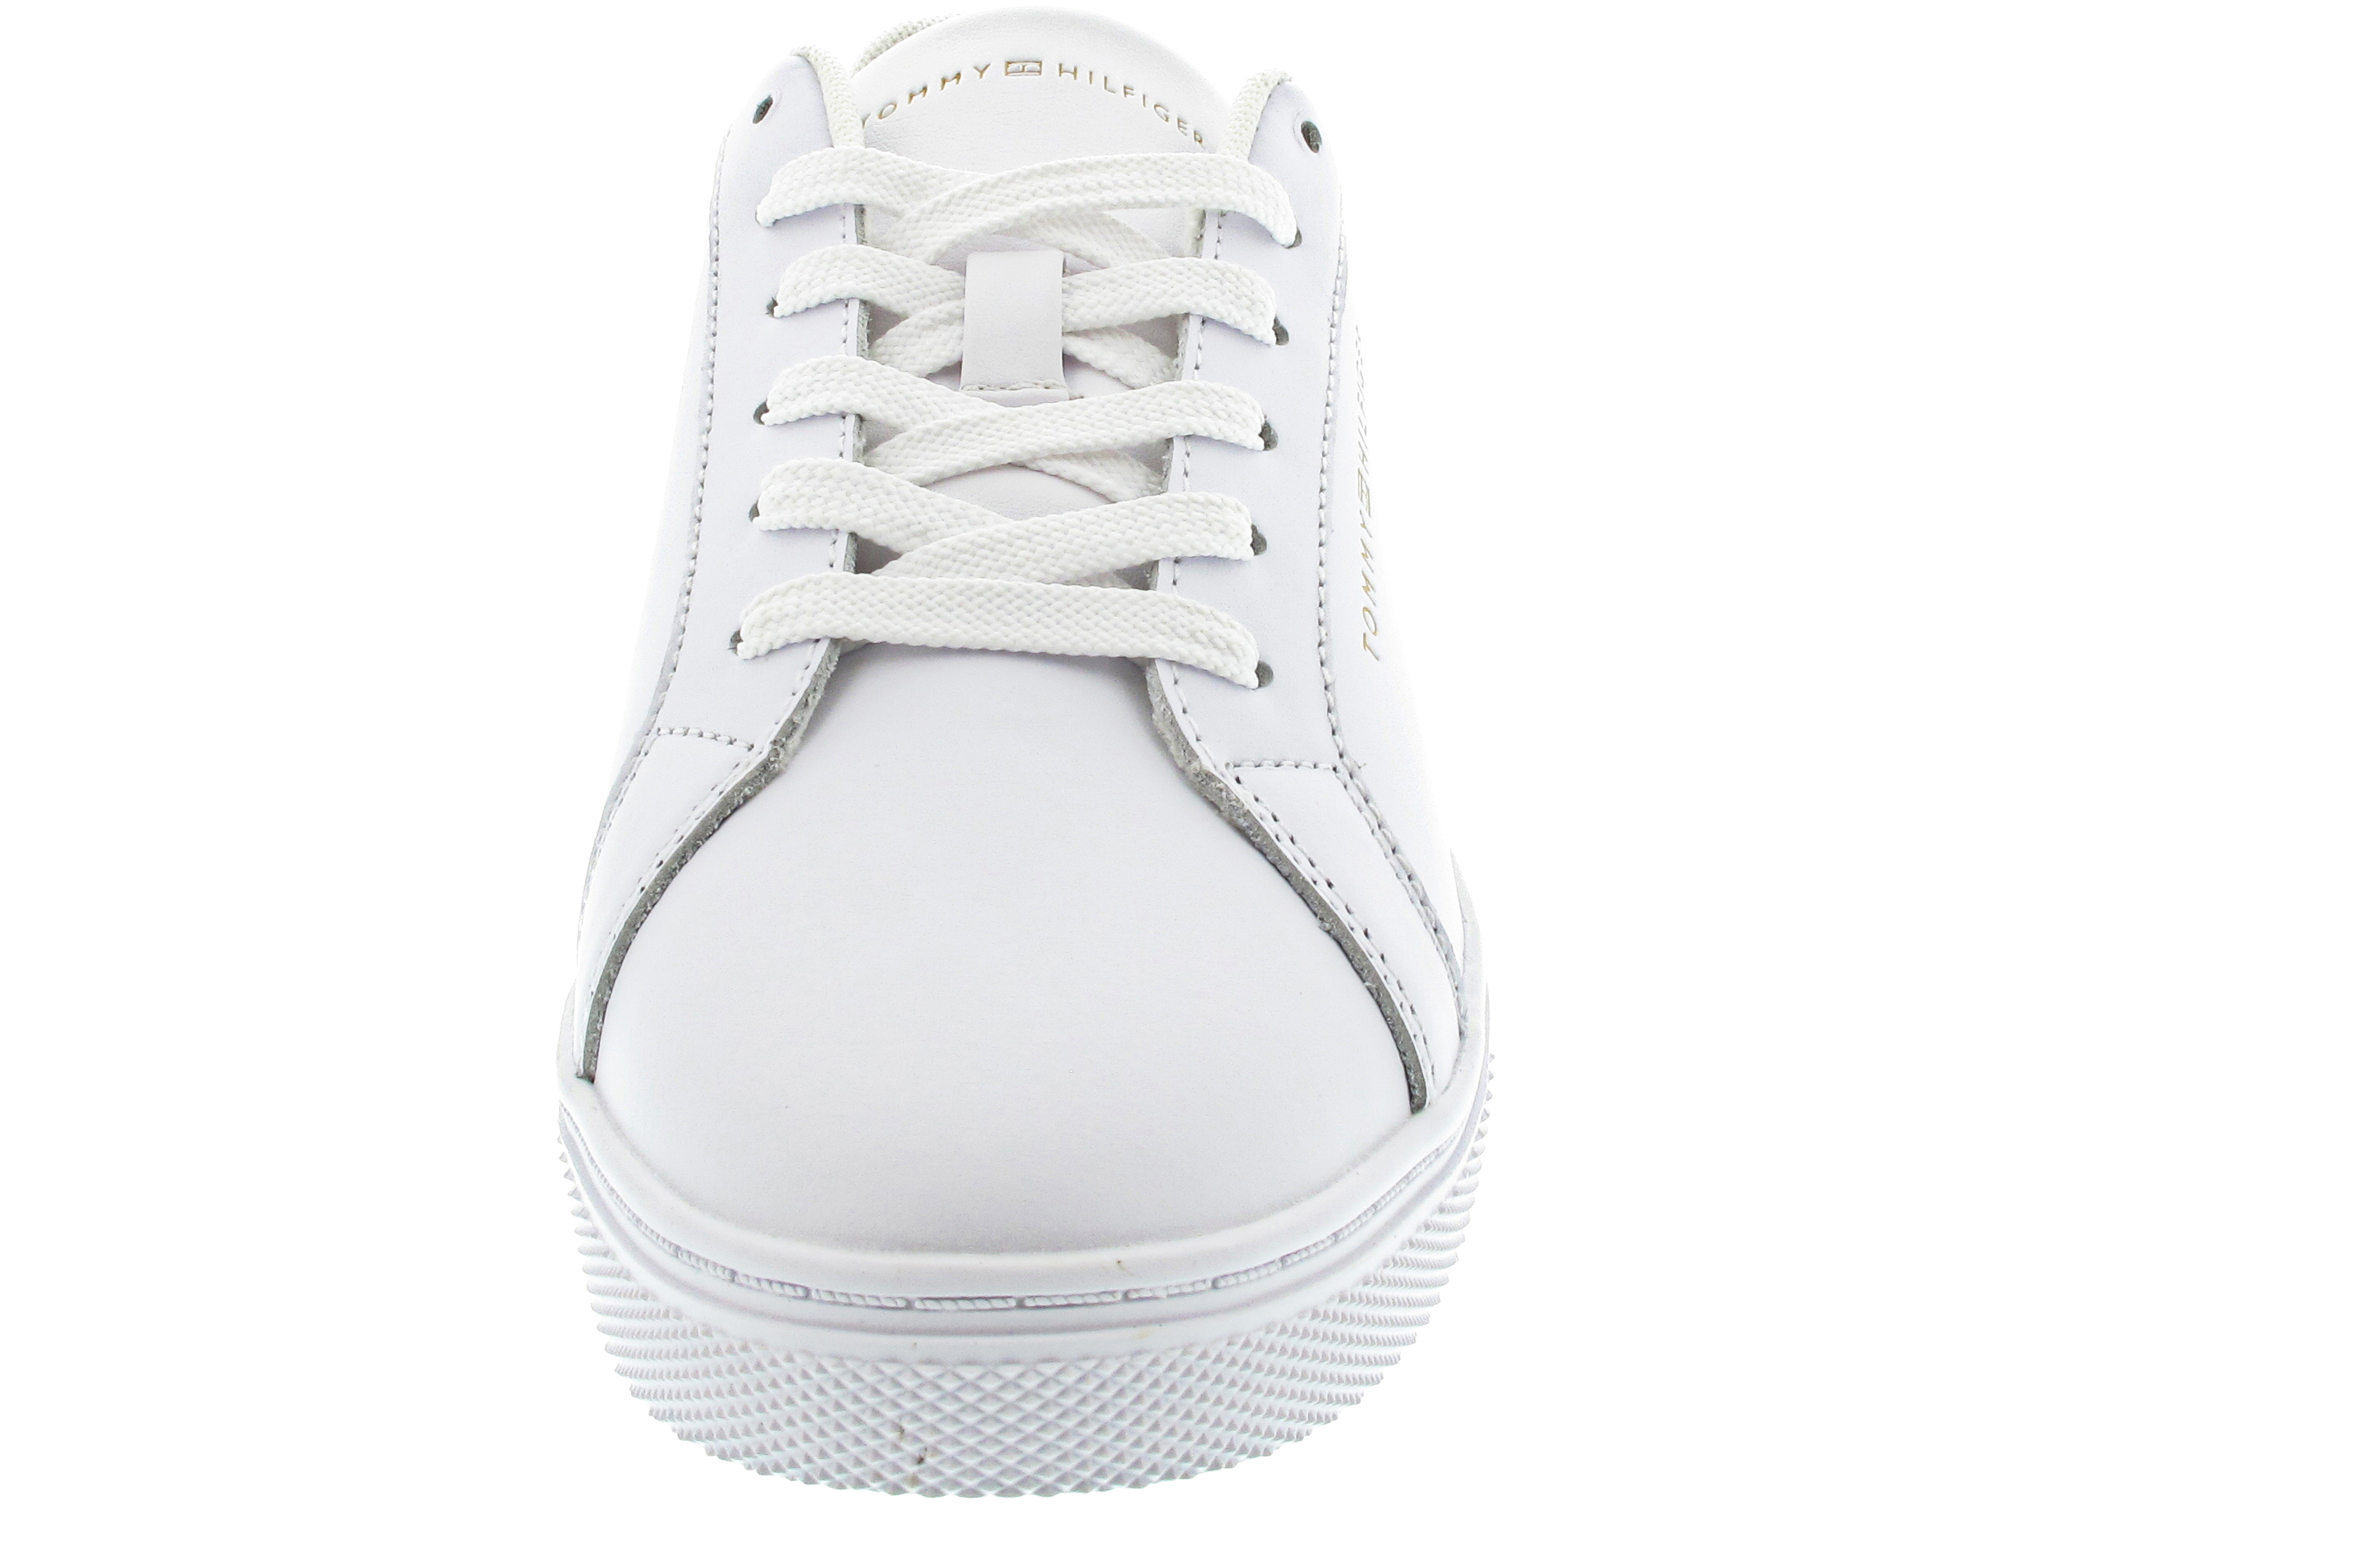 Tommy Hilfiger Essential Cupsole Sneaker